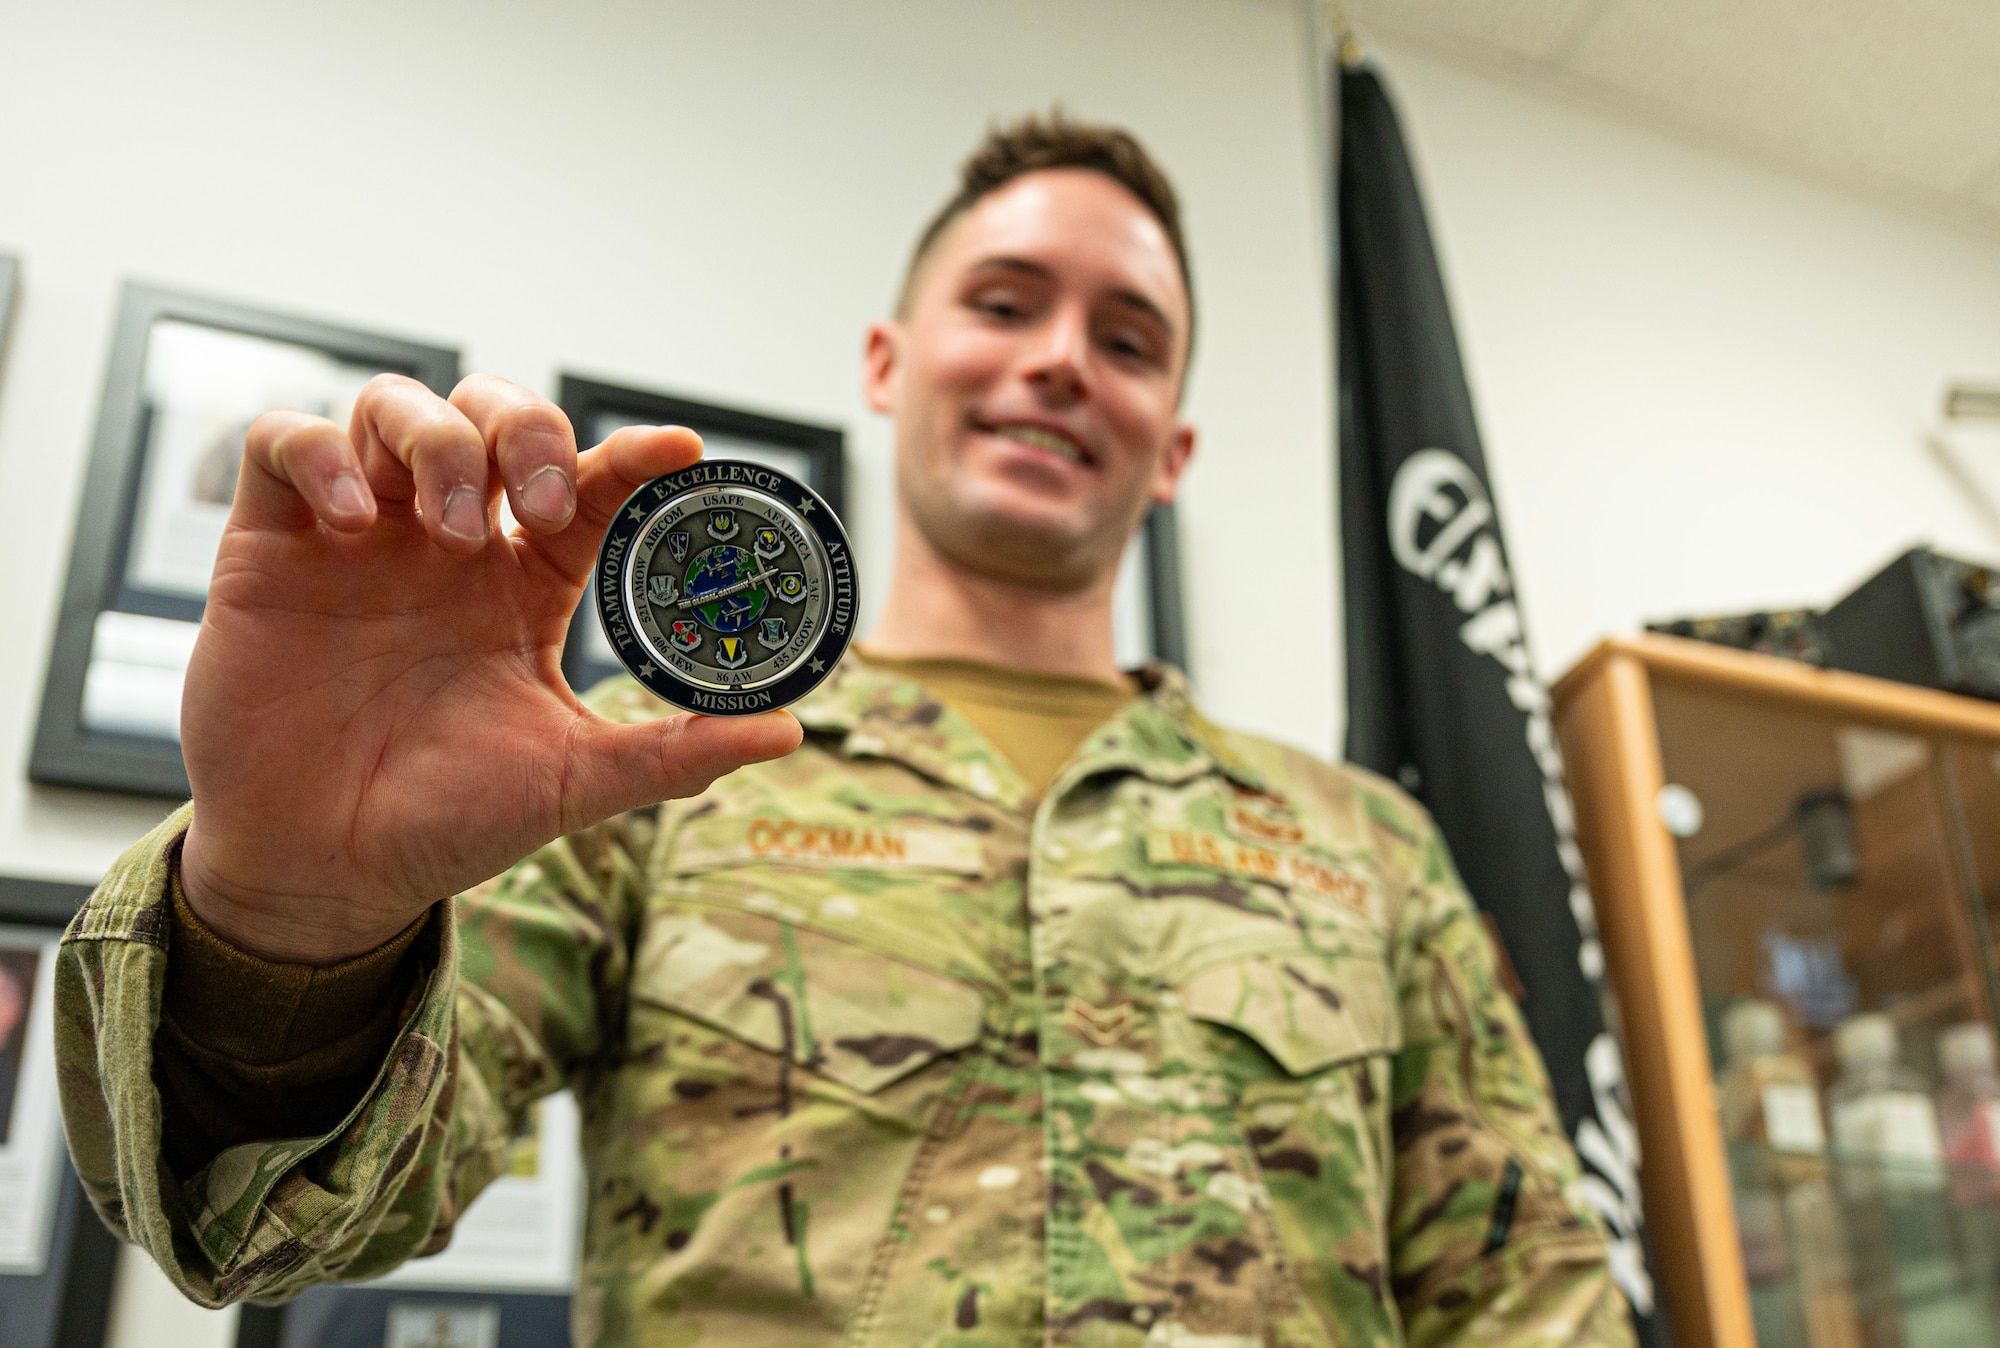 U.S. Air Force Airman 1st Class Kelsey Ockman, 786th Civil Engineer Squadron Explosive Ordnance Disposal apprentice, holds a challenge coin he earned at Ramstein Air Base, Germany, Jan. 30, 2024. Ockman credits his success to his team who he says are his inspiration and is proud to serve with. (U.S. Air Force photo by Senior Airman Thomas Karol)